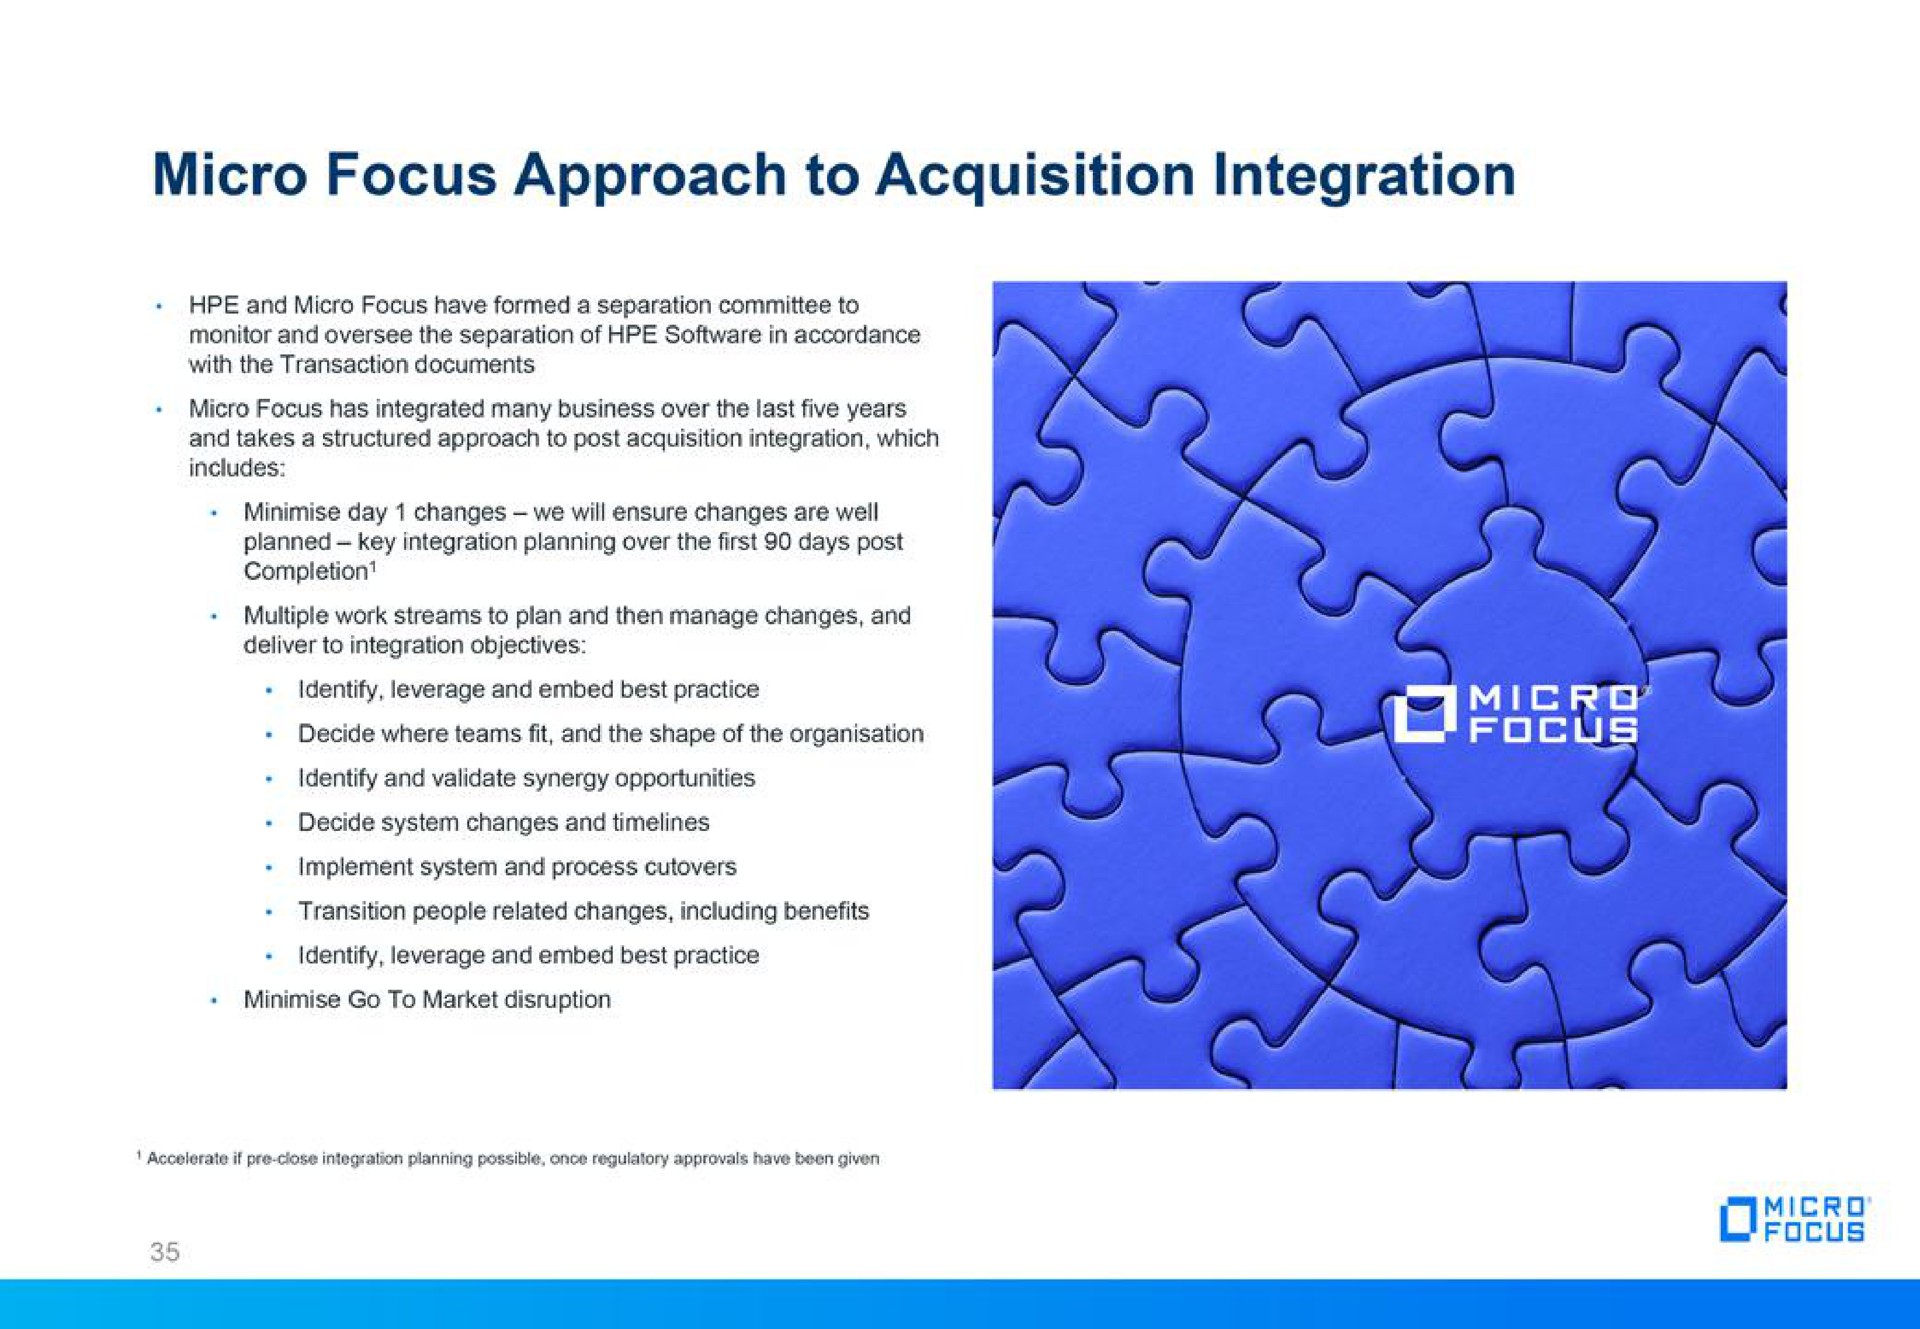 micro focus approach to acquisition integration | Micro Focus